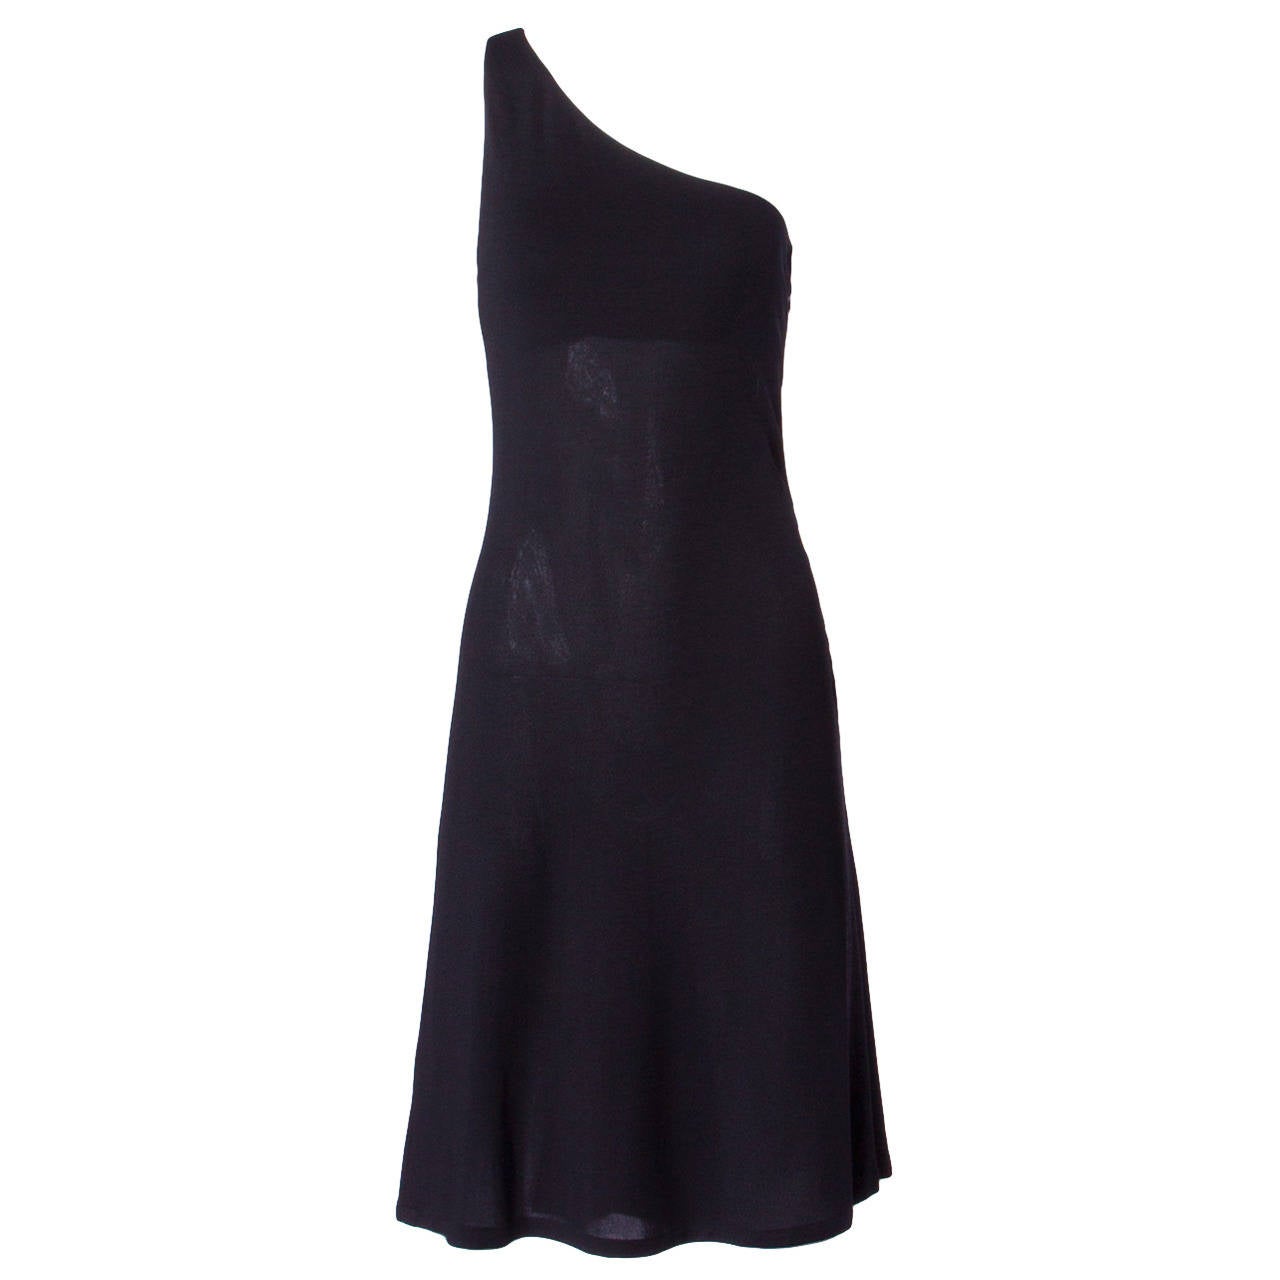 Moschino Couture! Cruise Me Baby Vintage One Shoulder Black Knit Dress For Sale